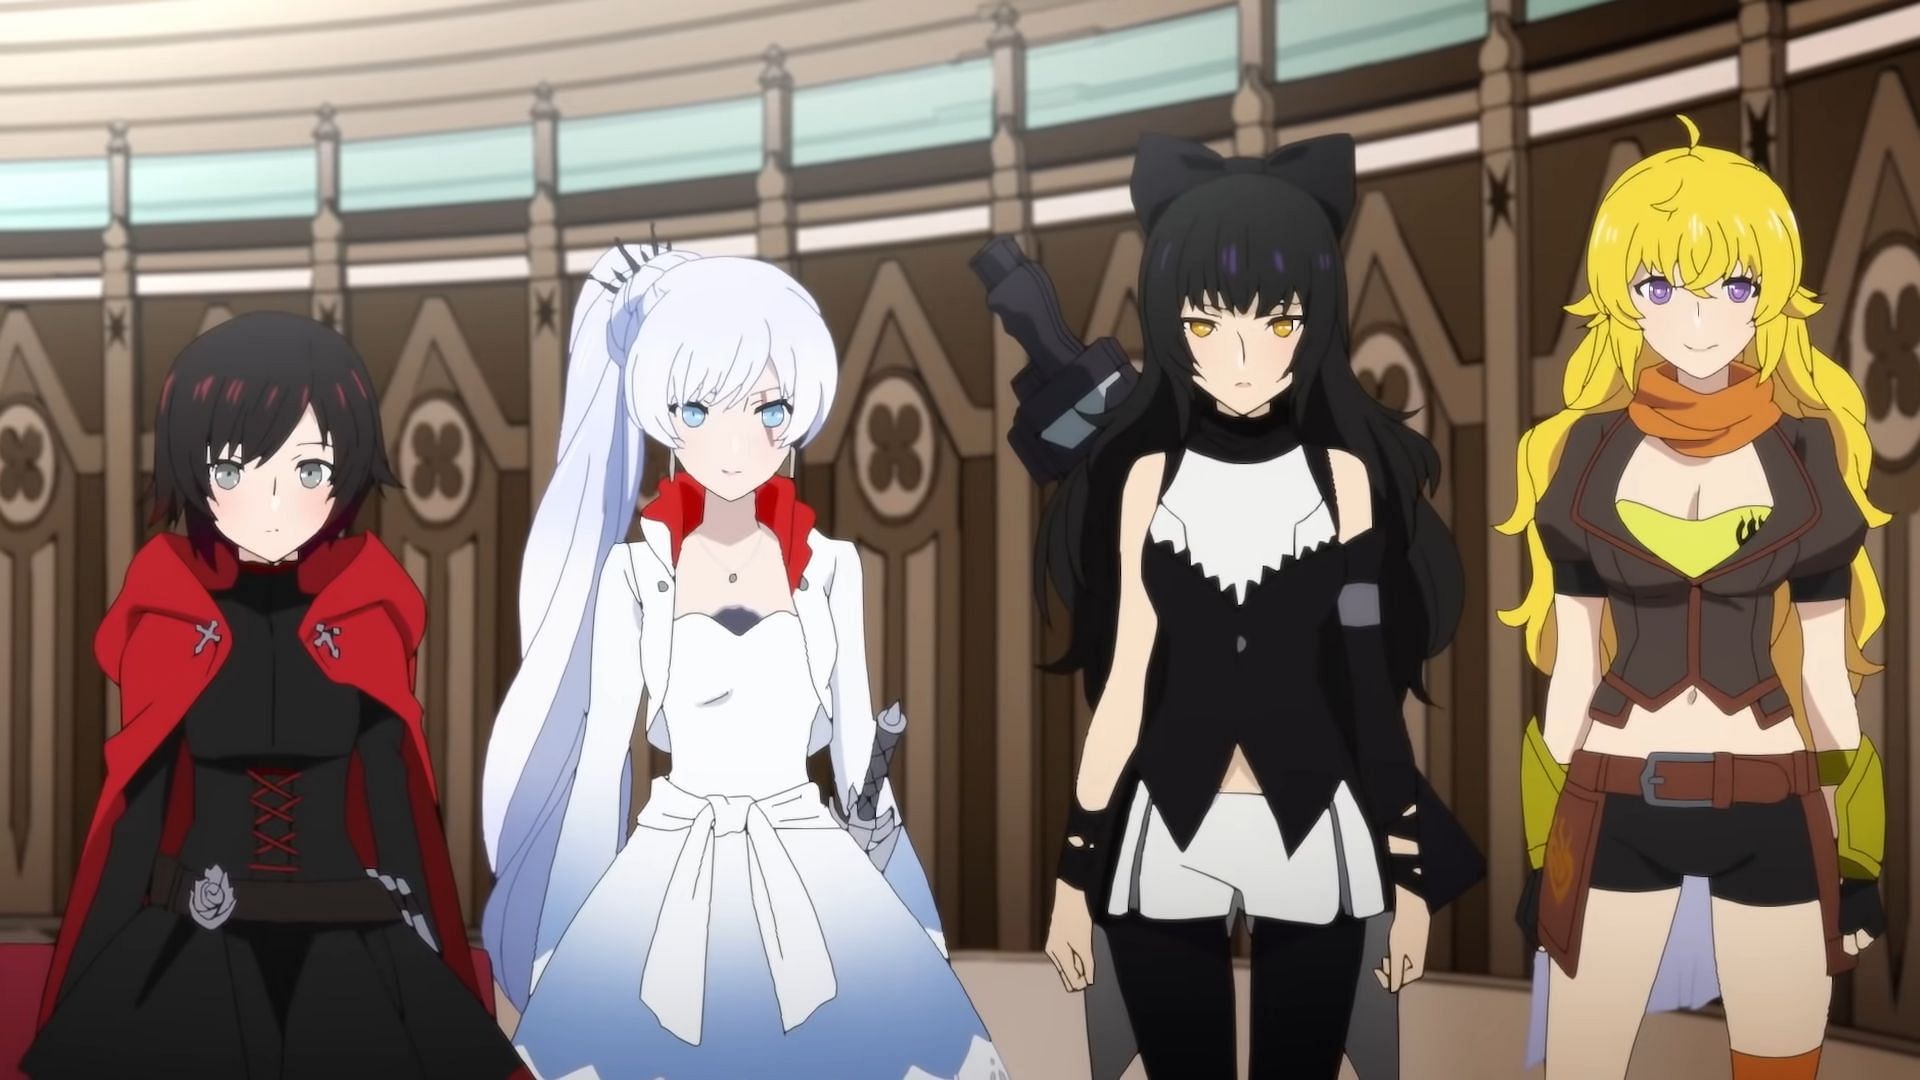 RWBY: Volume 9 Episodes Guide – Release Dates, Times & More